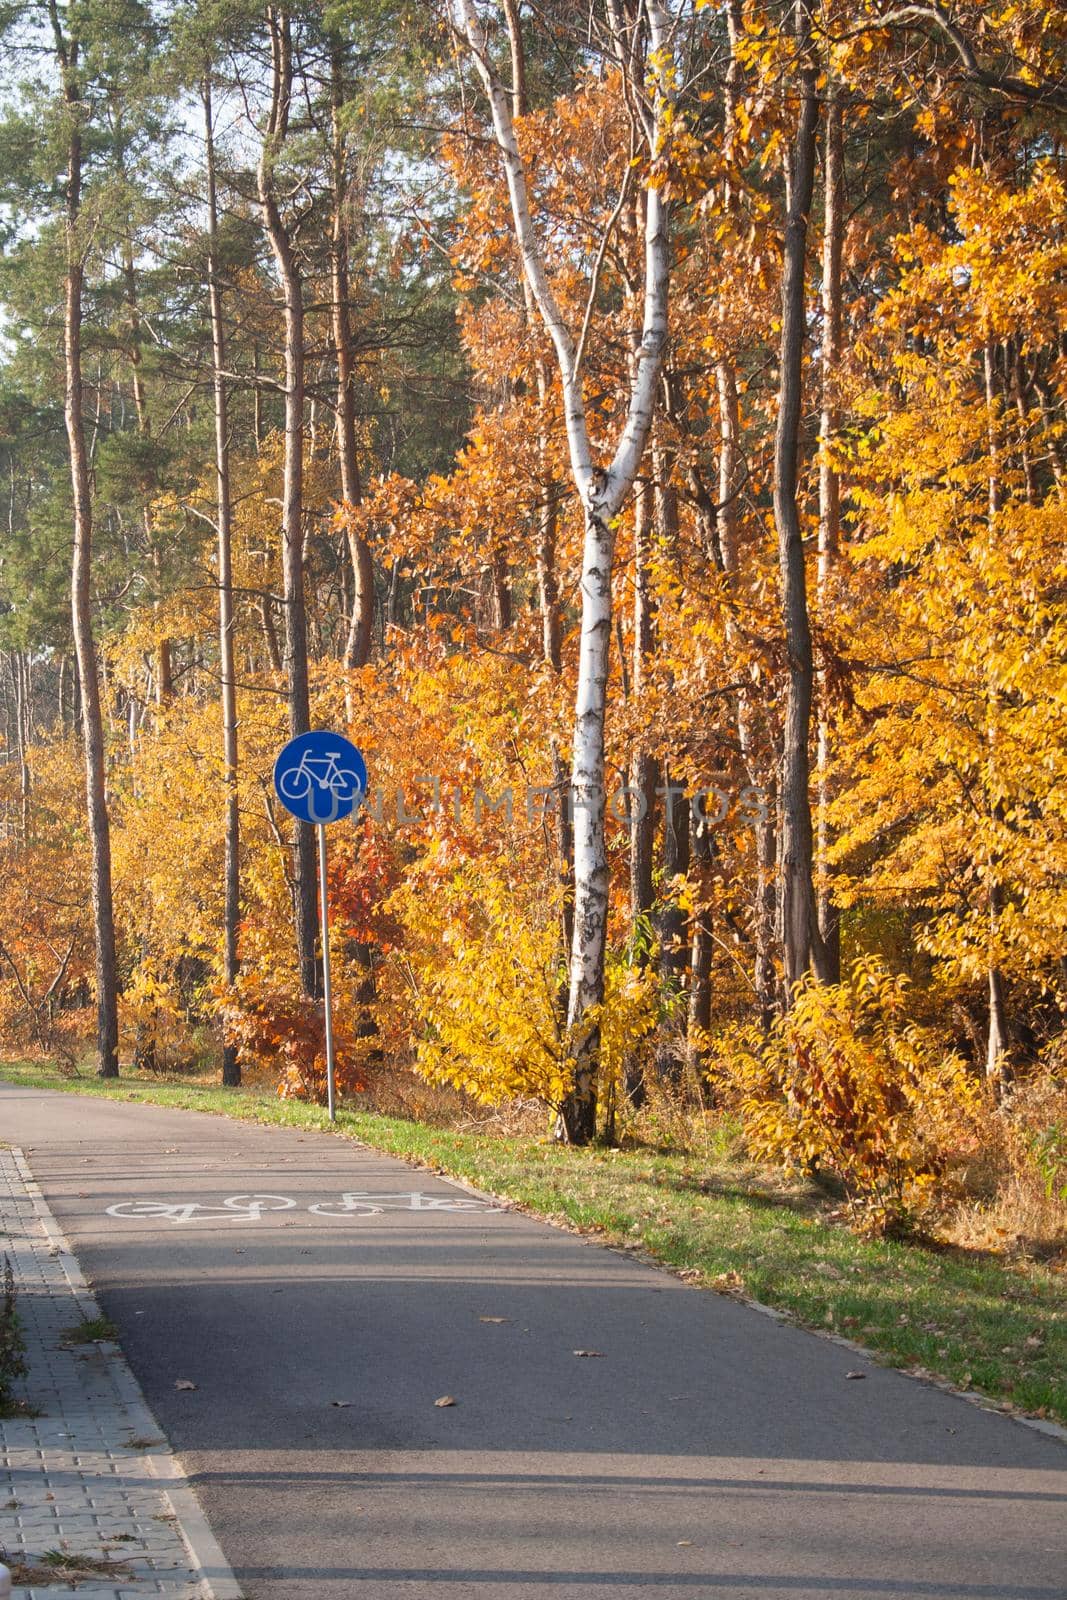 Bicycle road in autumn. A healthy lifestyle with countryside biking in the colorful forest by ingalinder